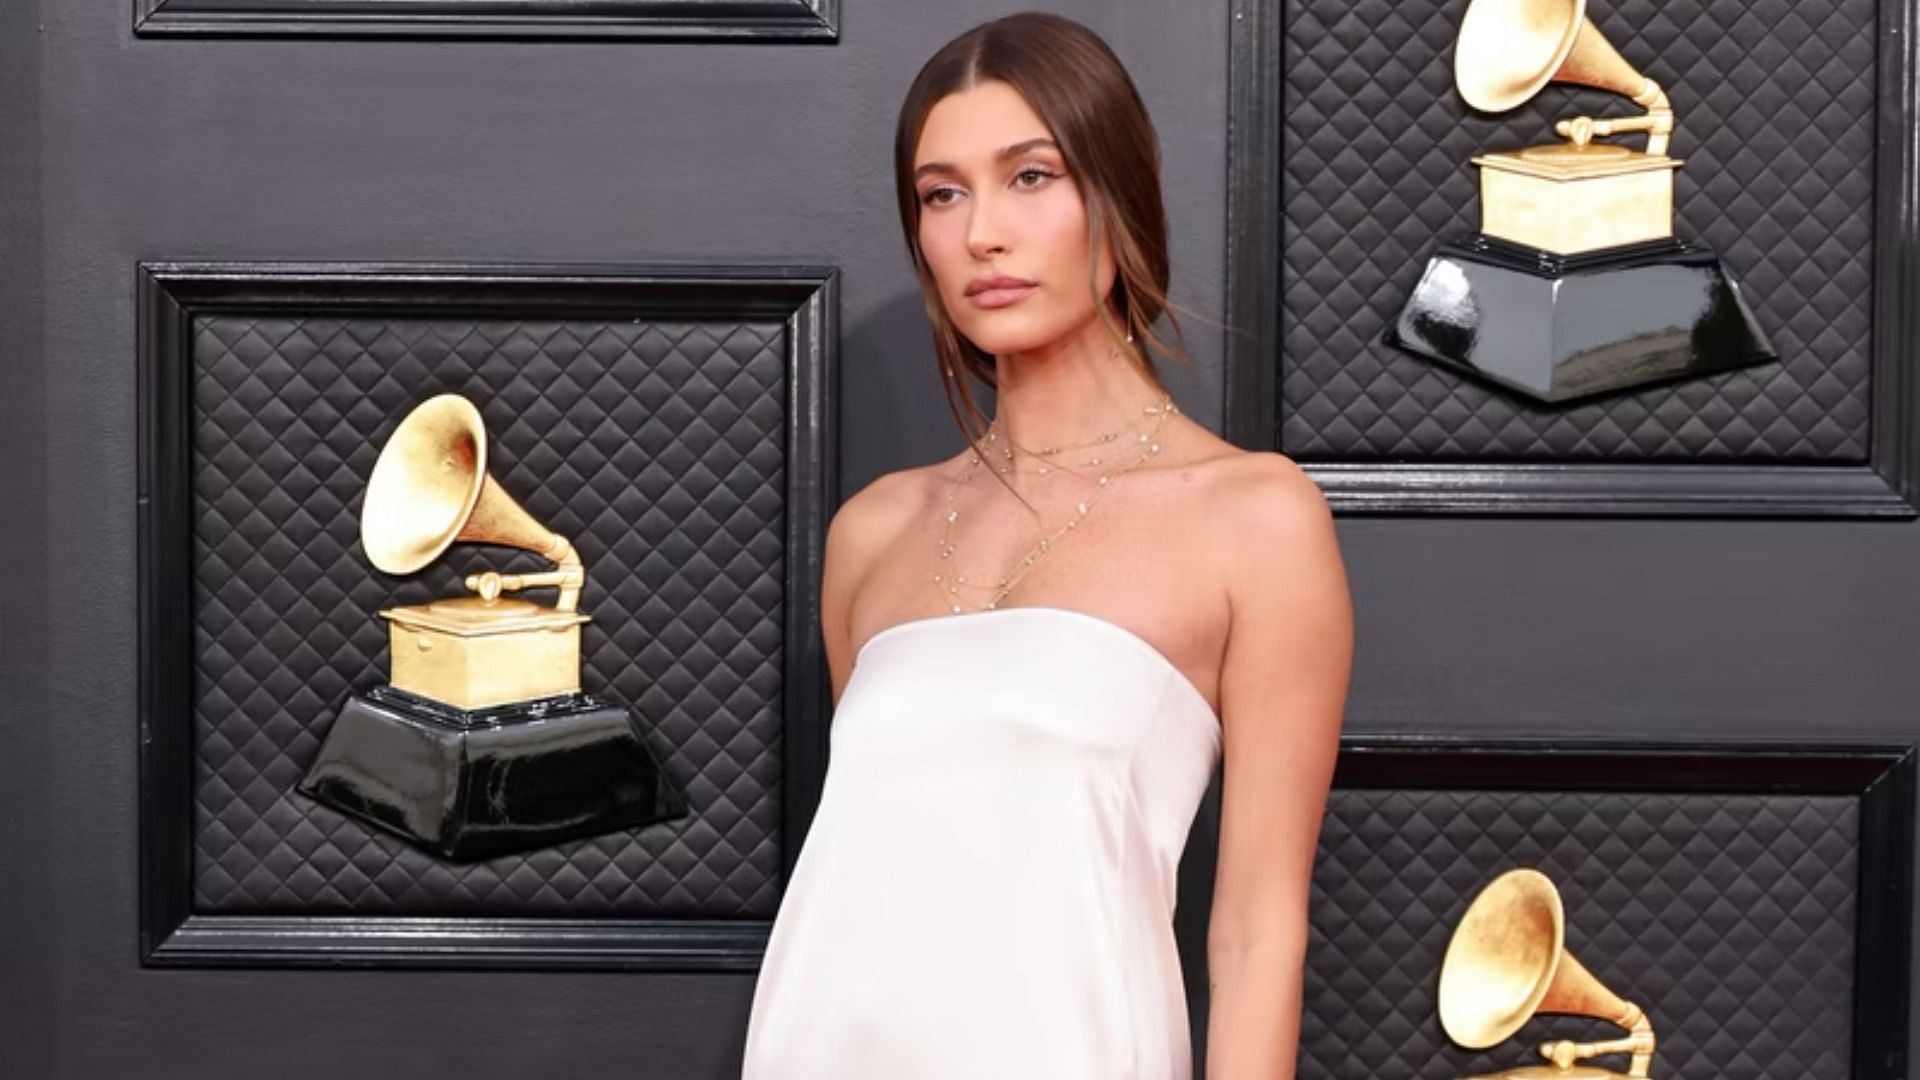 Hailey Bieber has previously expressed her desire to become a mother (Image via Getty Images/Amy Sussman)